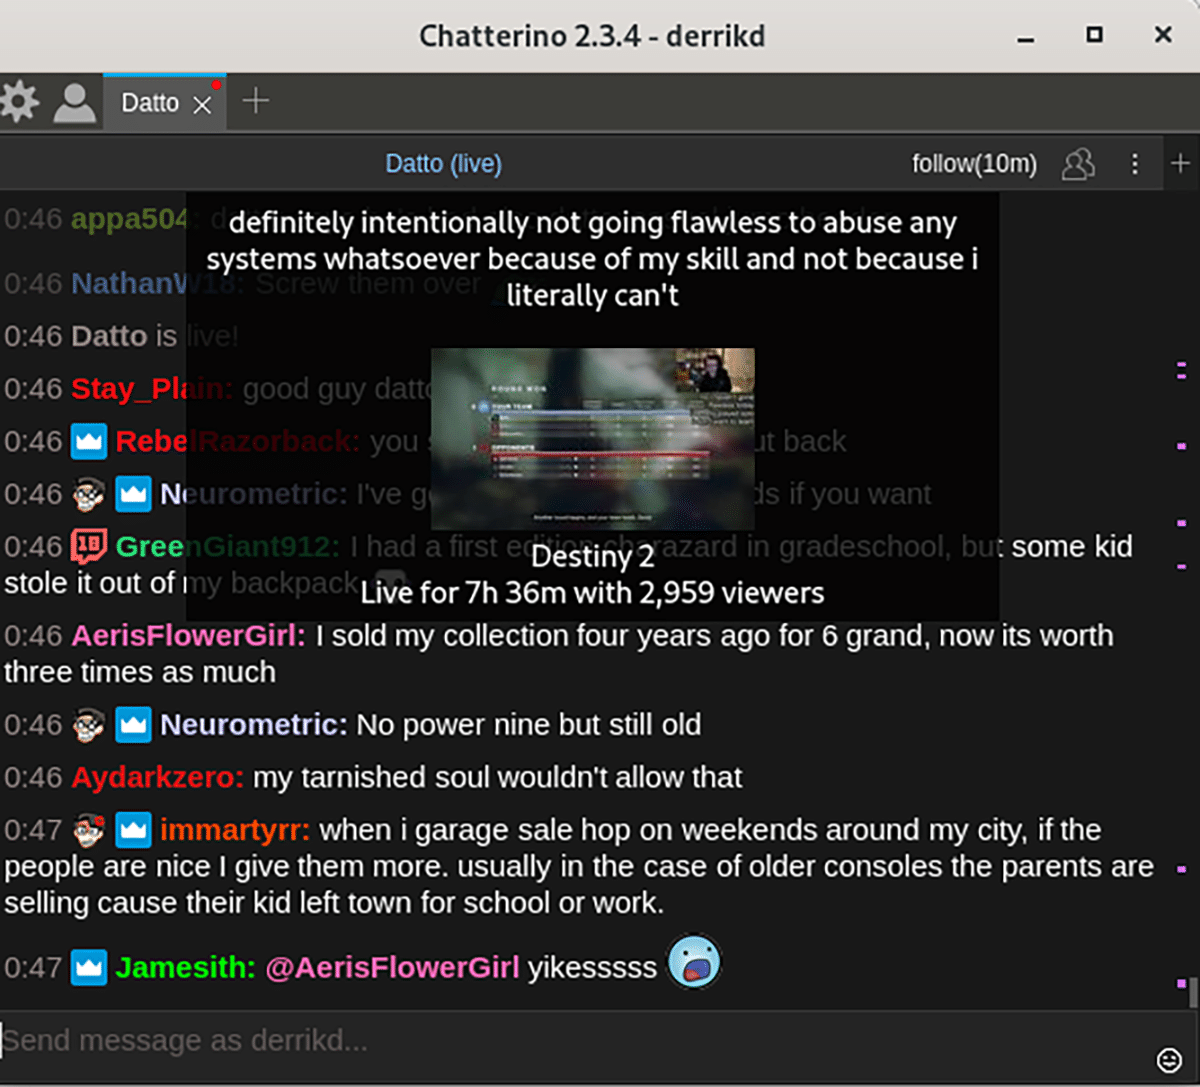 How to Chat on Twitch Streams on Linux Desktop with Chatterino